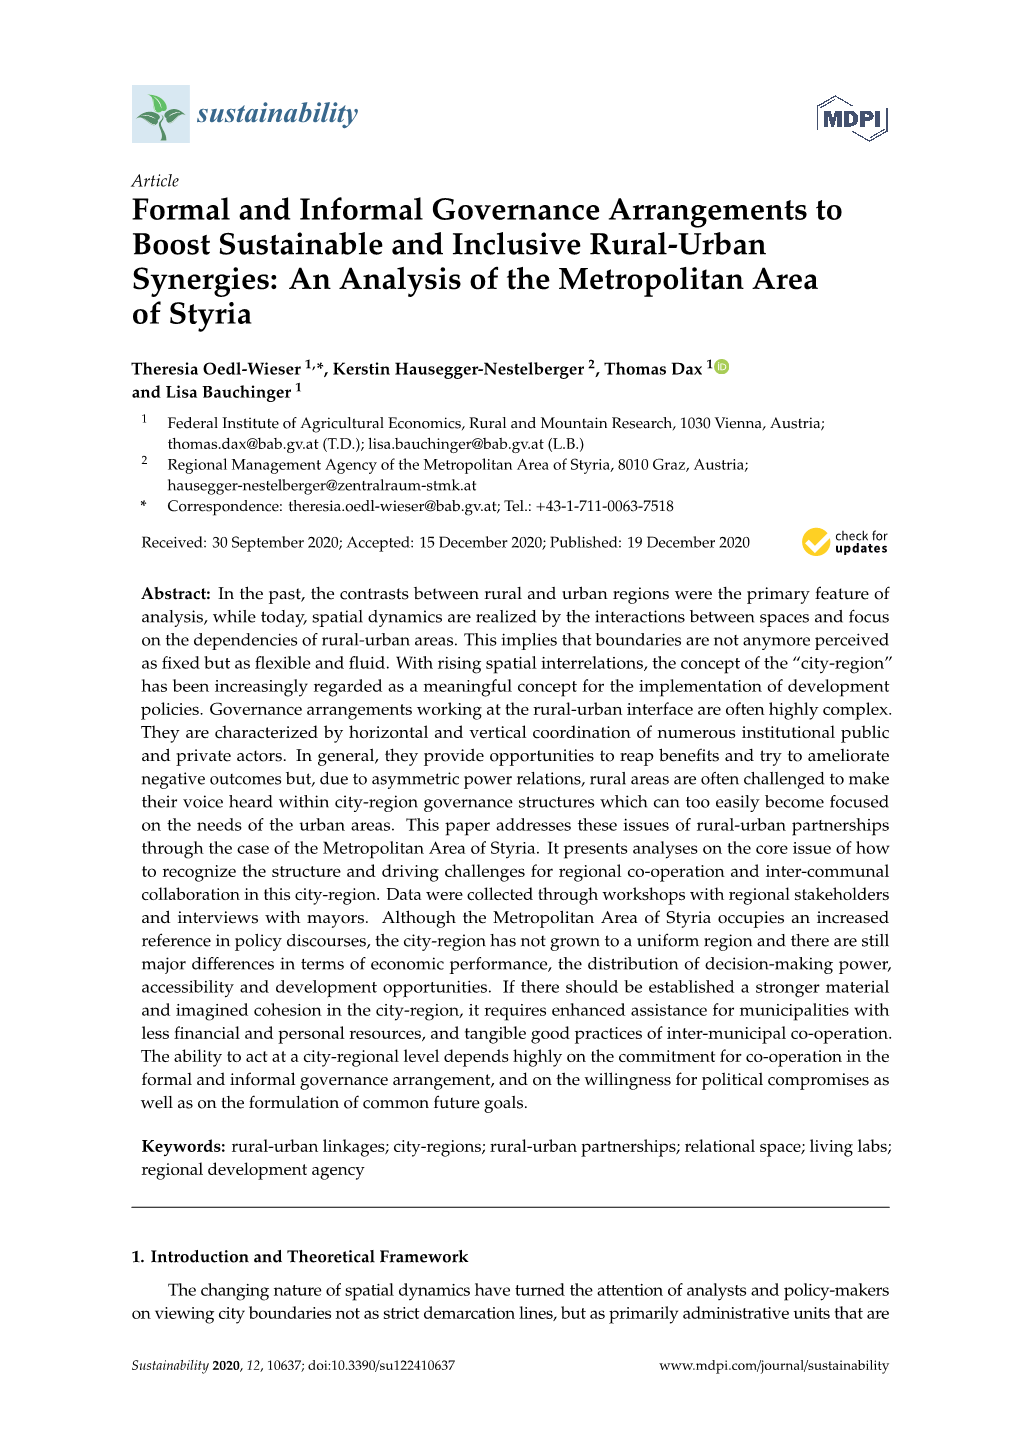 Formal and Informal Governance Arrangements to Boost Sustainable and Inclusive Rural-Urban Synergies: an Analysis of the Metropolitan Area of Styria